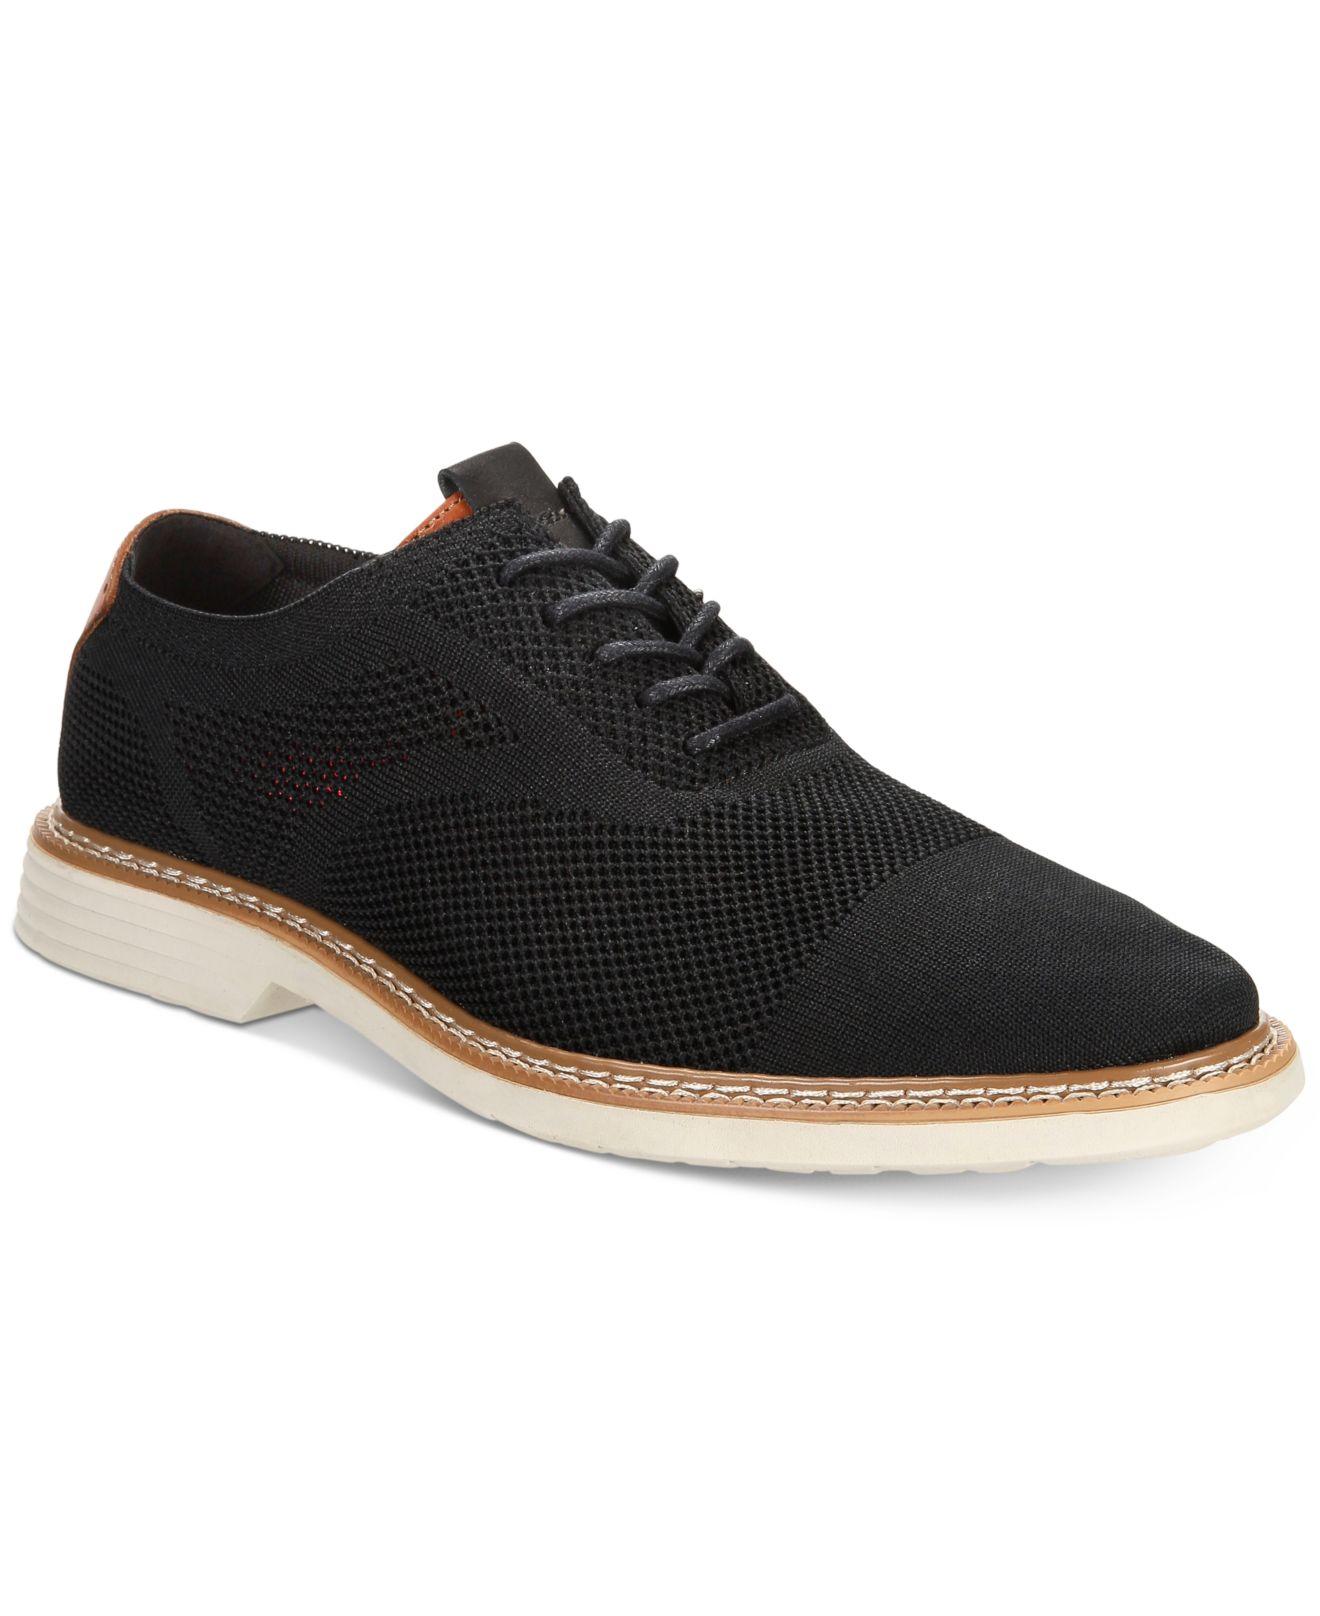 Alfani Varick Alfatech Comfort Flx Textured Knit Oxfords, Created For ...